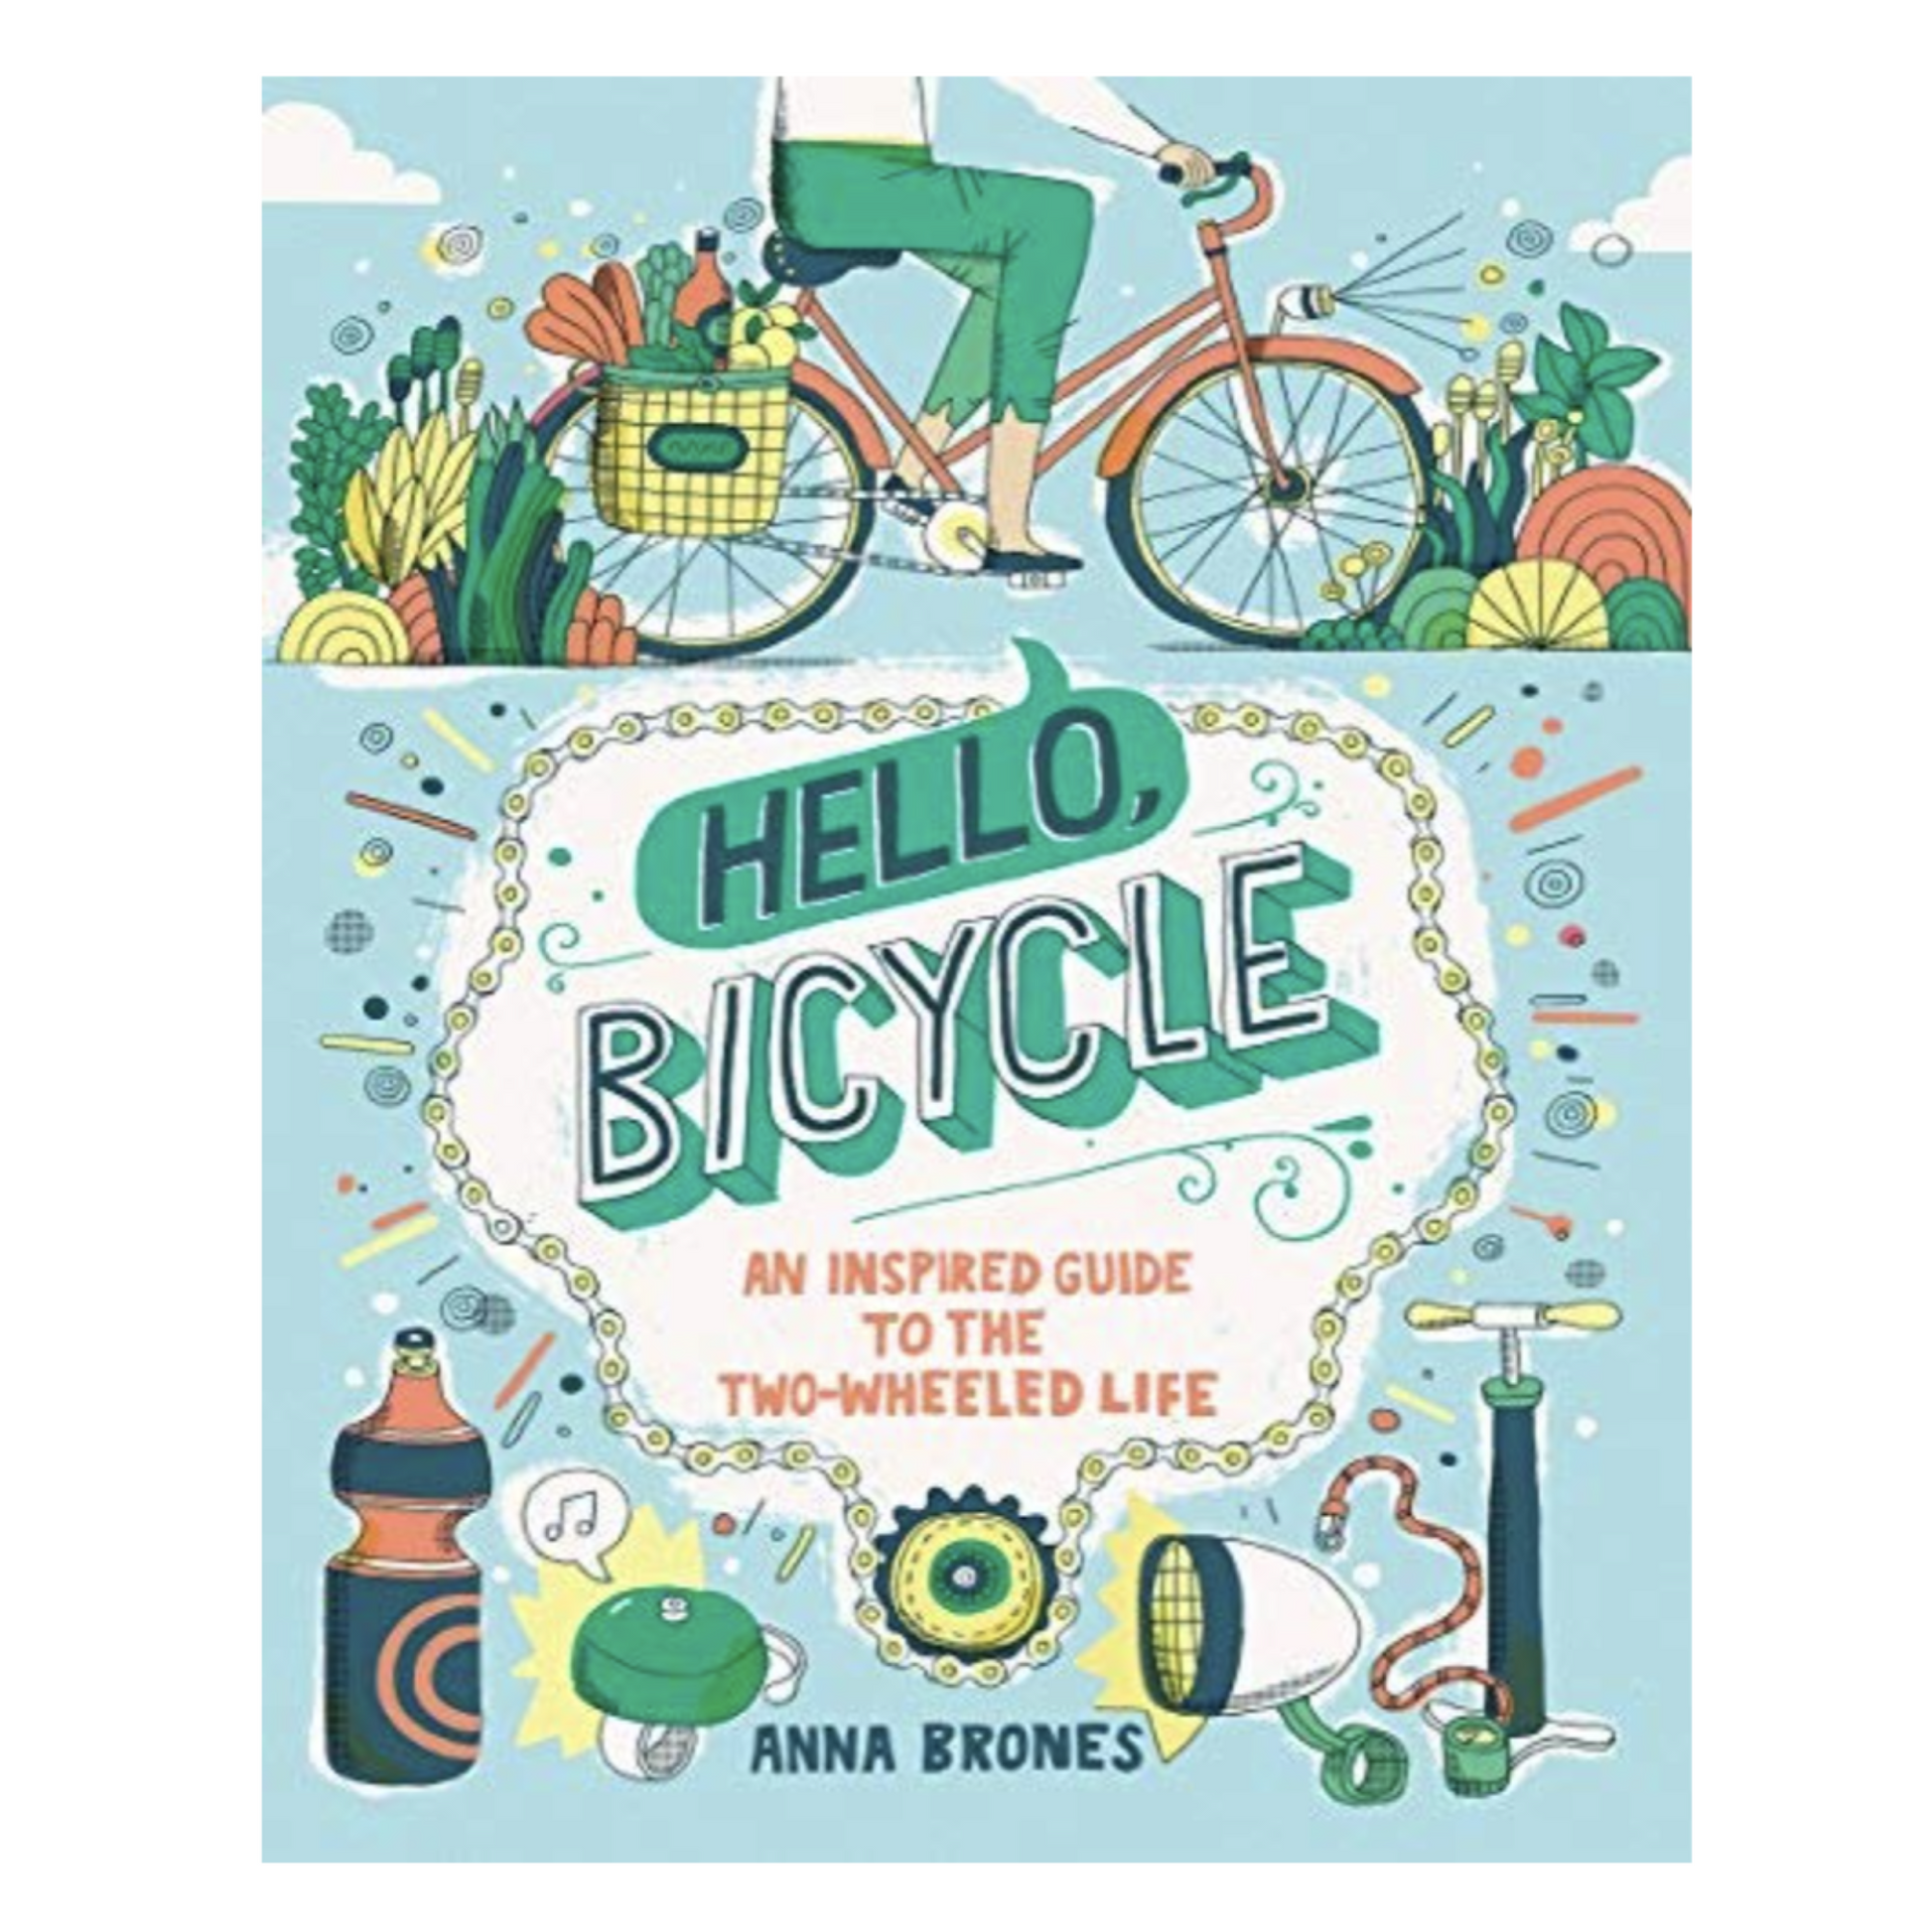 Hello, Bicycle - An Inspired Guide to the Two-Wheeled Life (8868051747103)